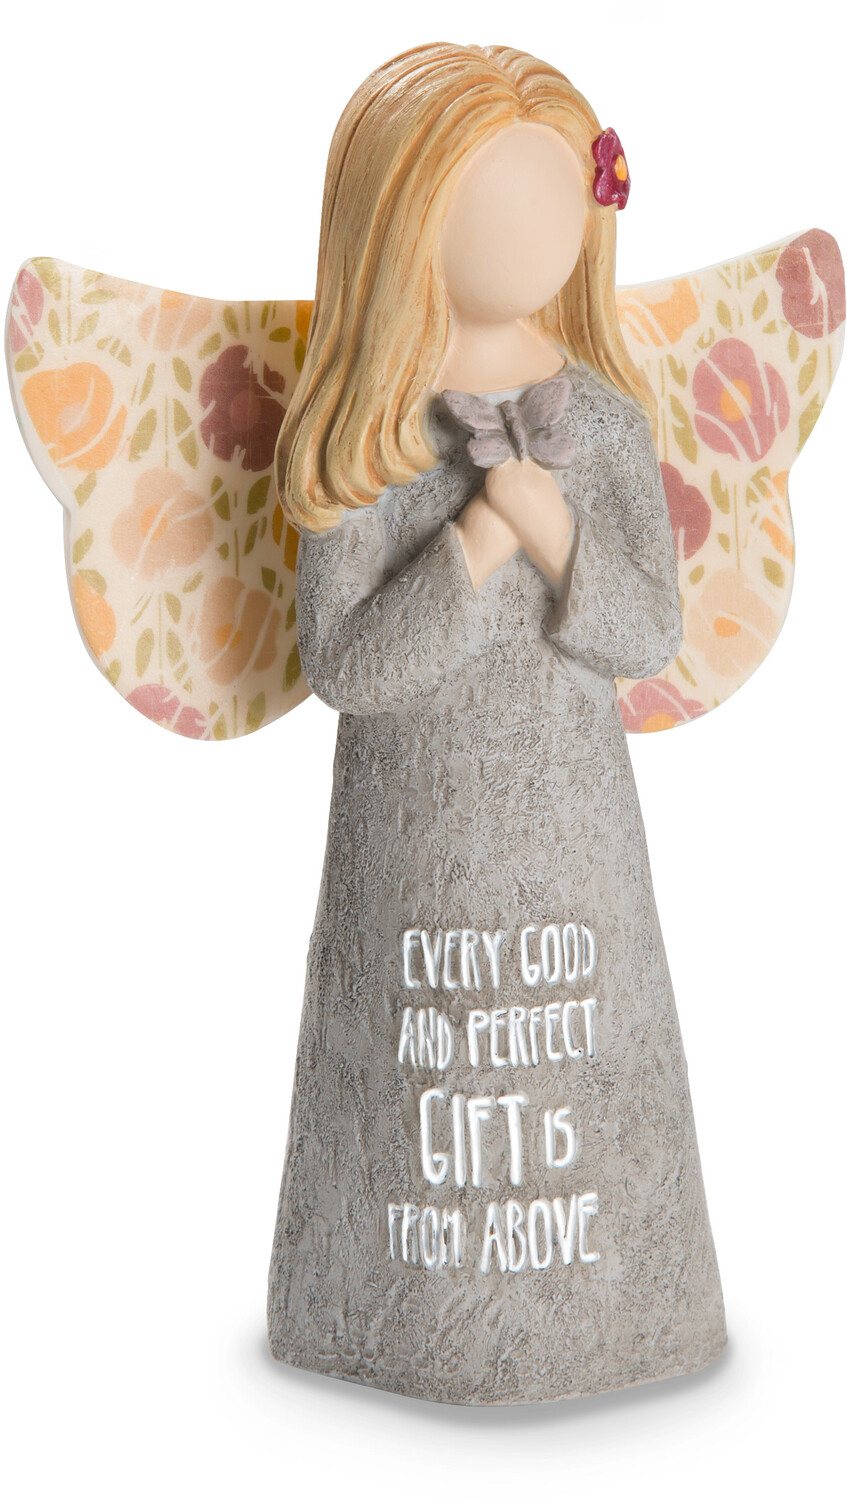 Gift by Bless My Bloomers - Gift - 5" Child Angel Figurine